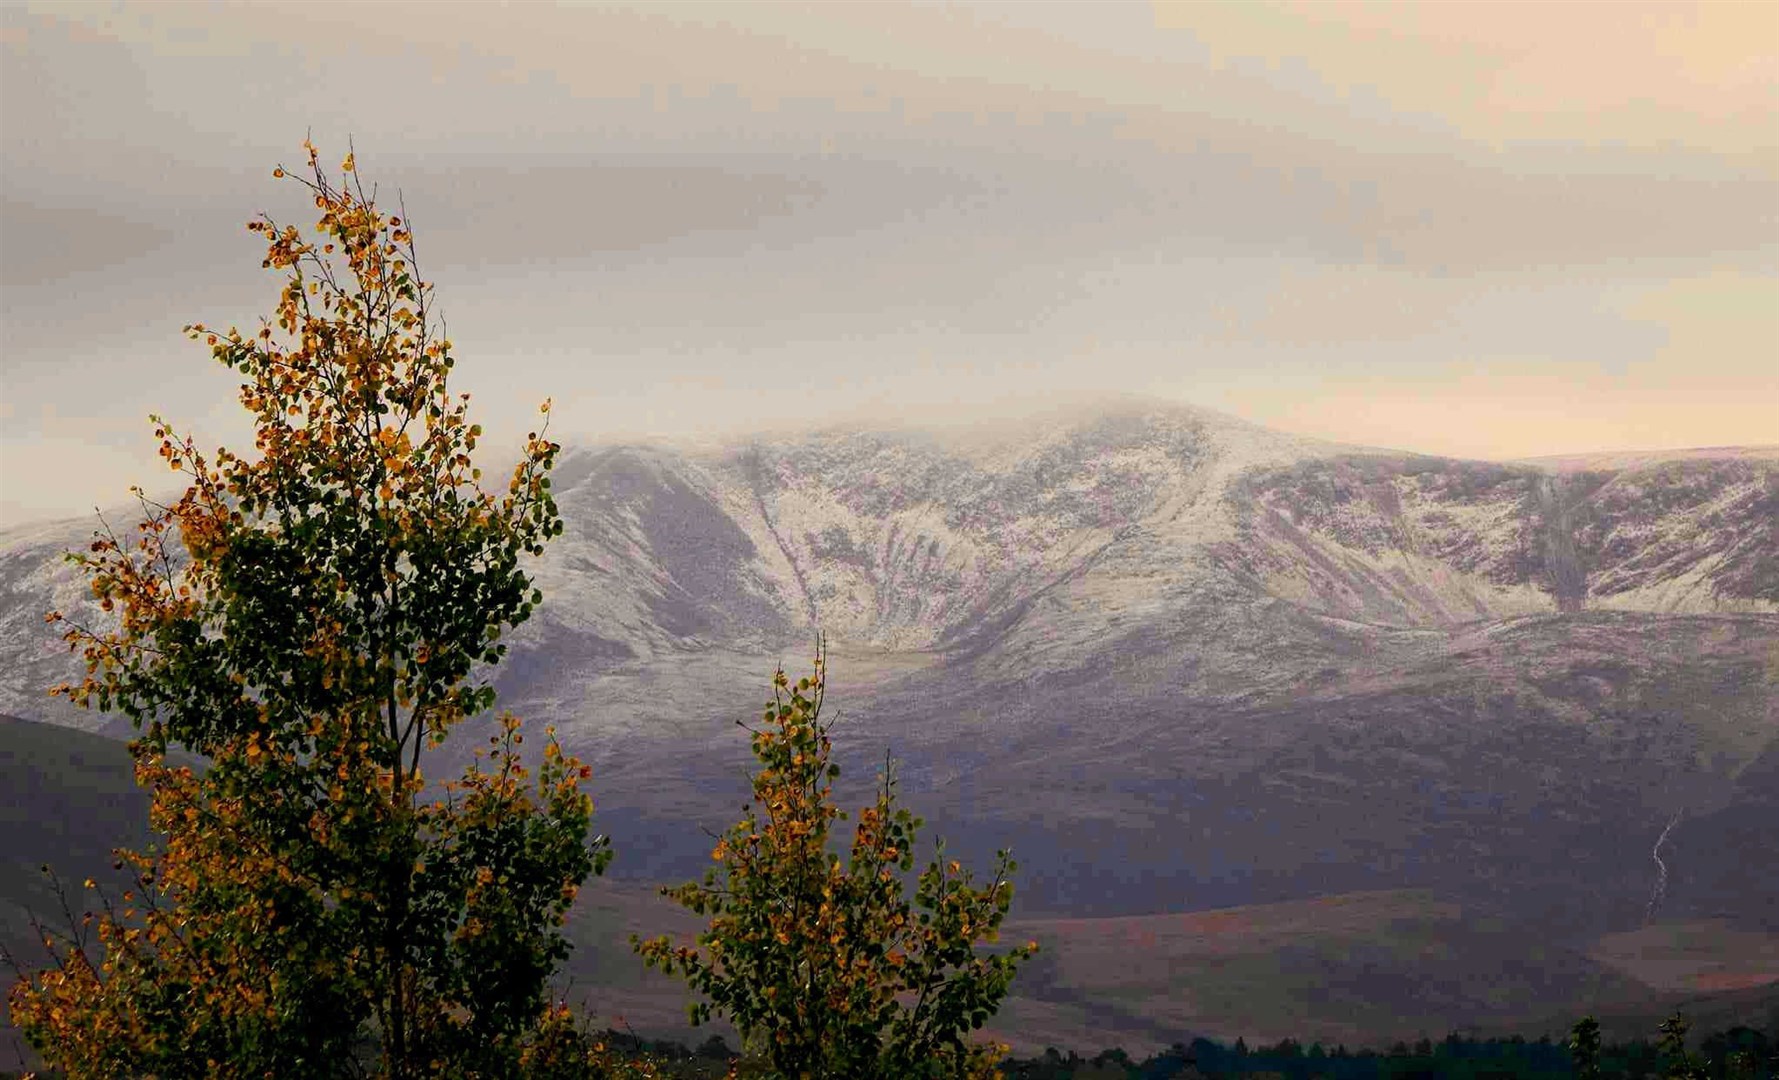 The first snow on Cairngorm Mountain. David Macleod